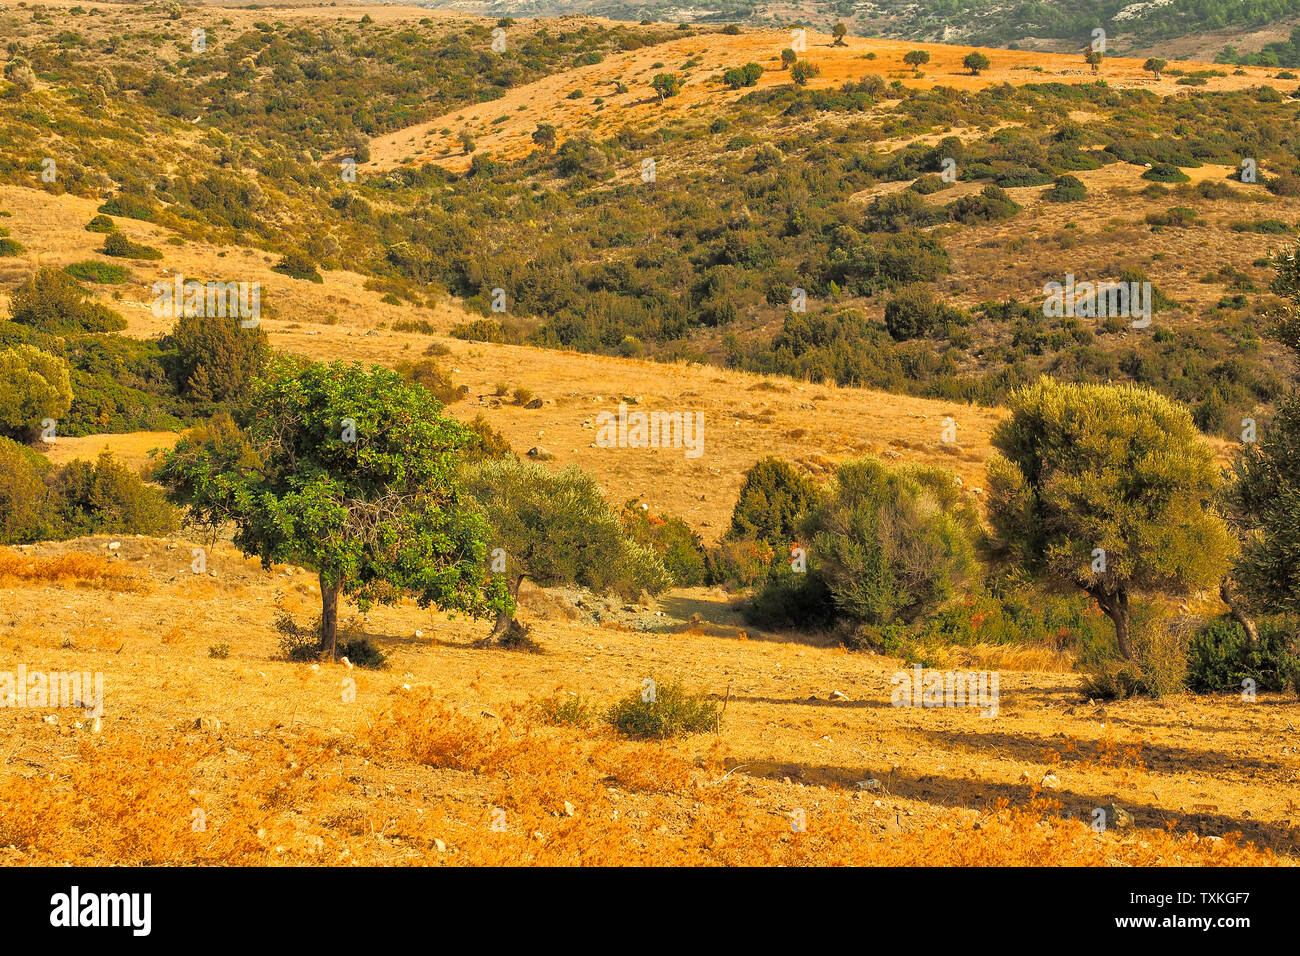 Typical landscape of dry areas. Akamas Peninsula. Cyprus Stock Photo